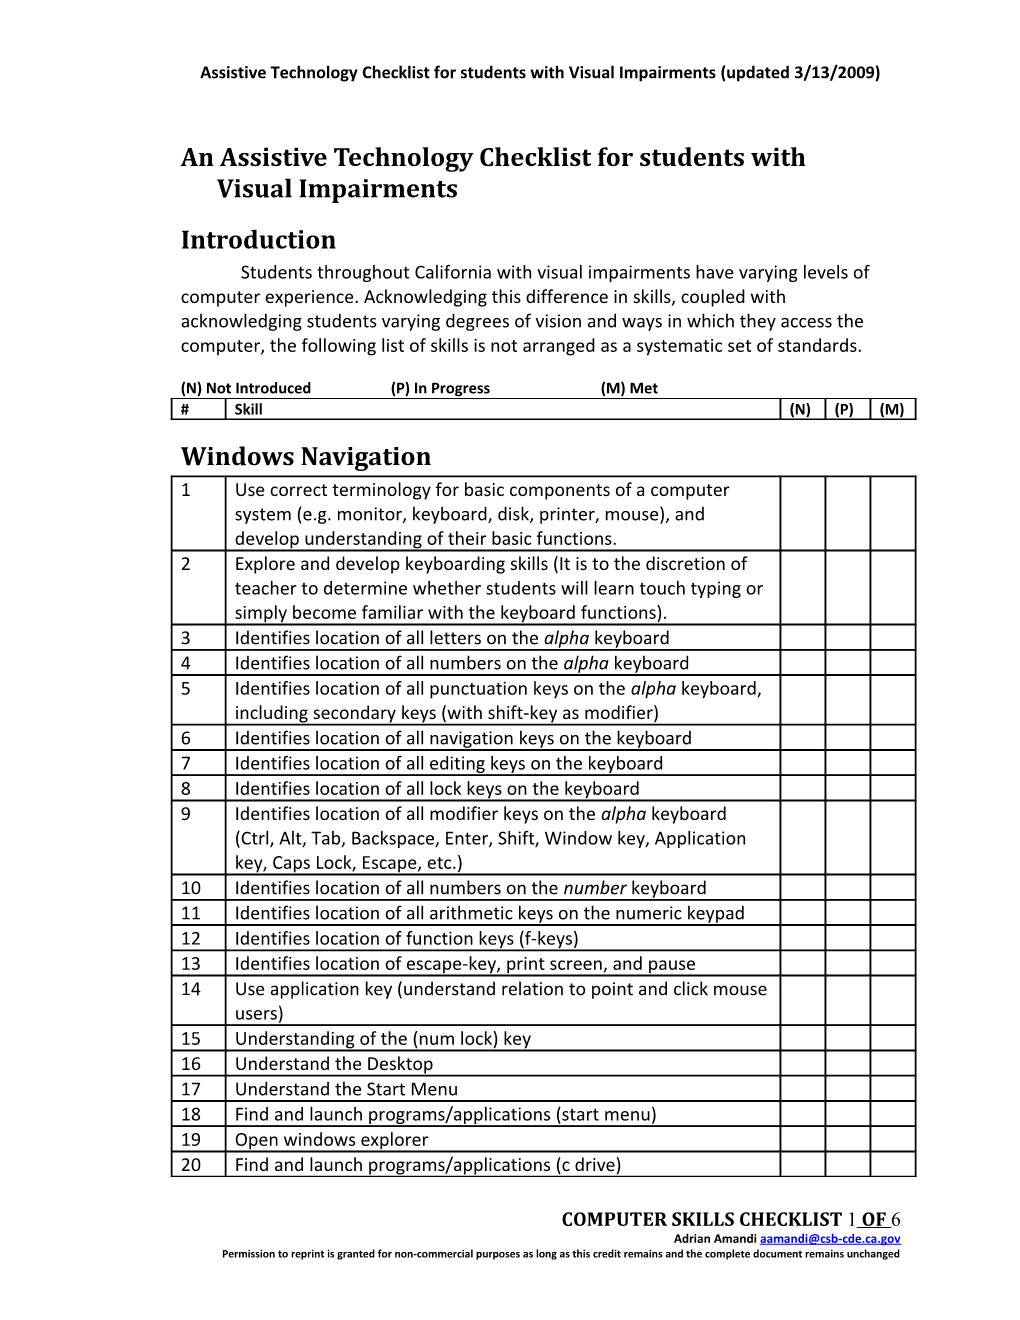 Assistive Technology Checklist for Students with Visual Impairments (Updated 3/13/2009)